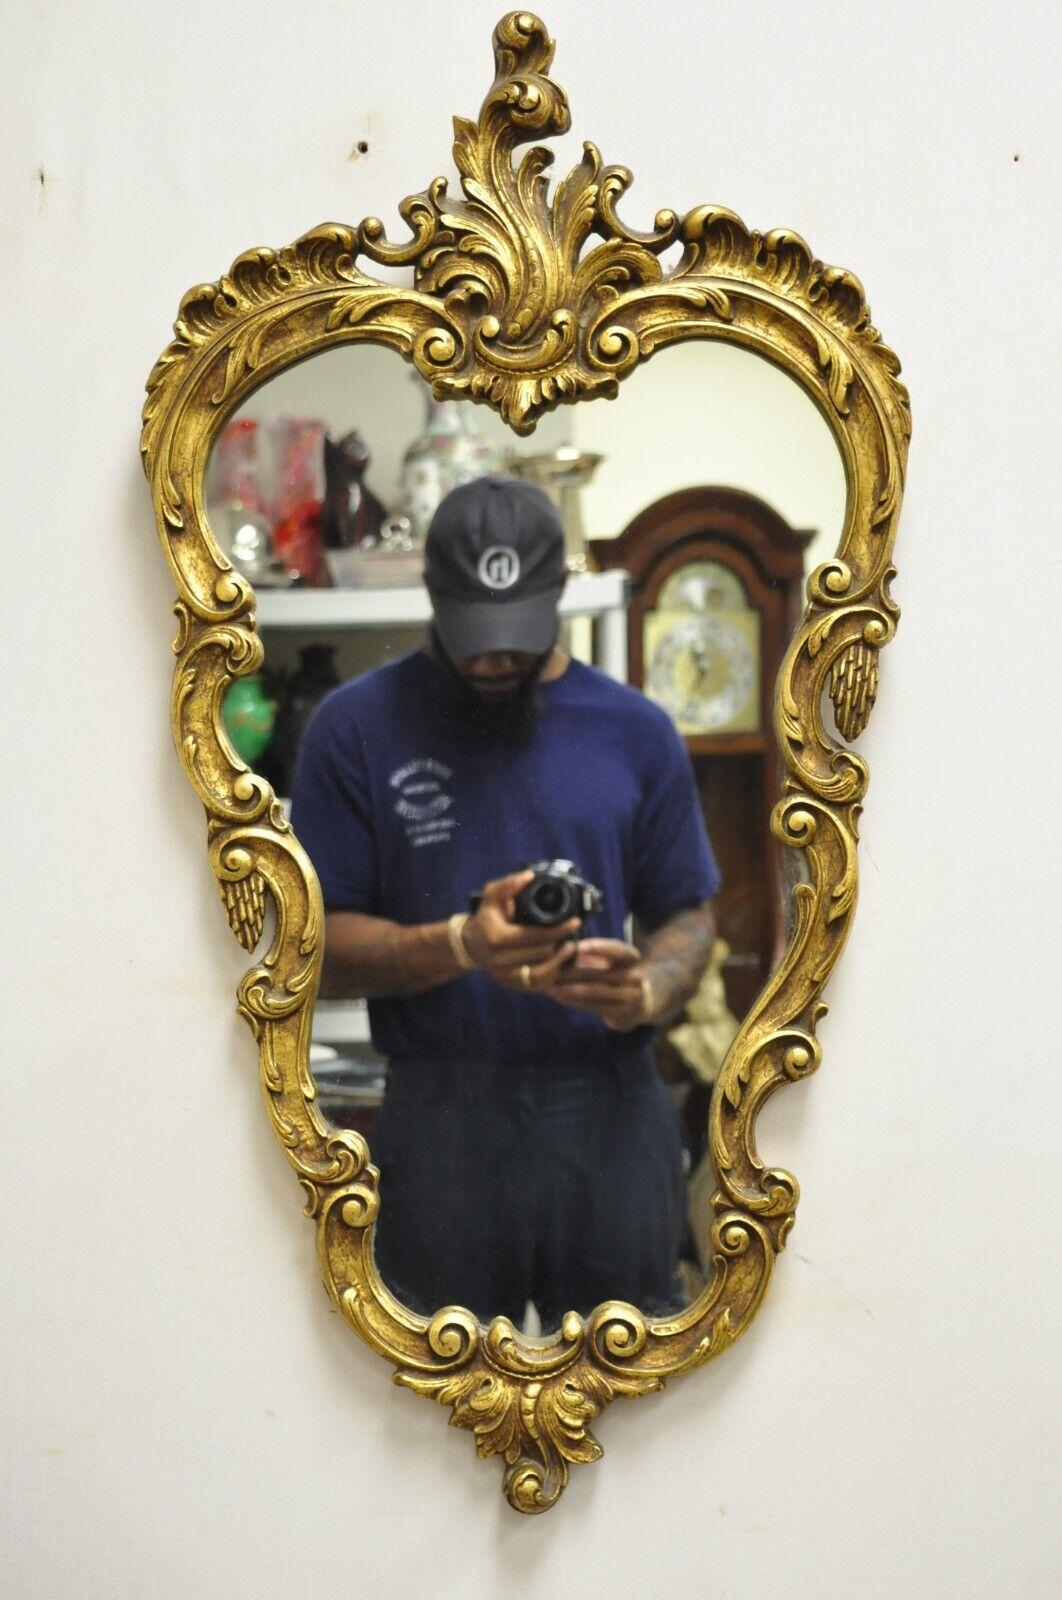 Vintage French Rococo Style Gold Gilt Leafy Scrollwork Wall Mirror. Circa Mid 20th Century. Measurements: 34.5